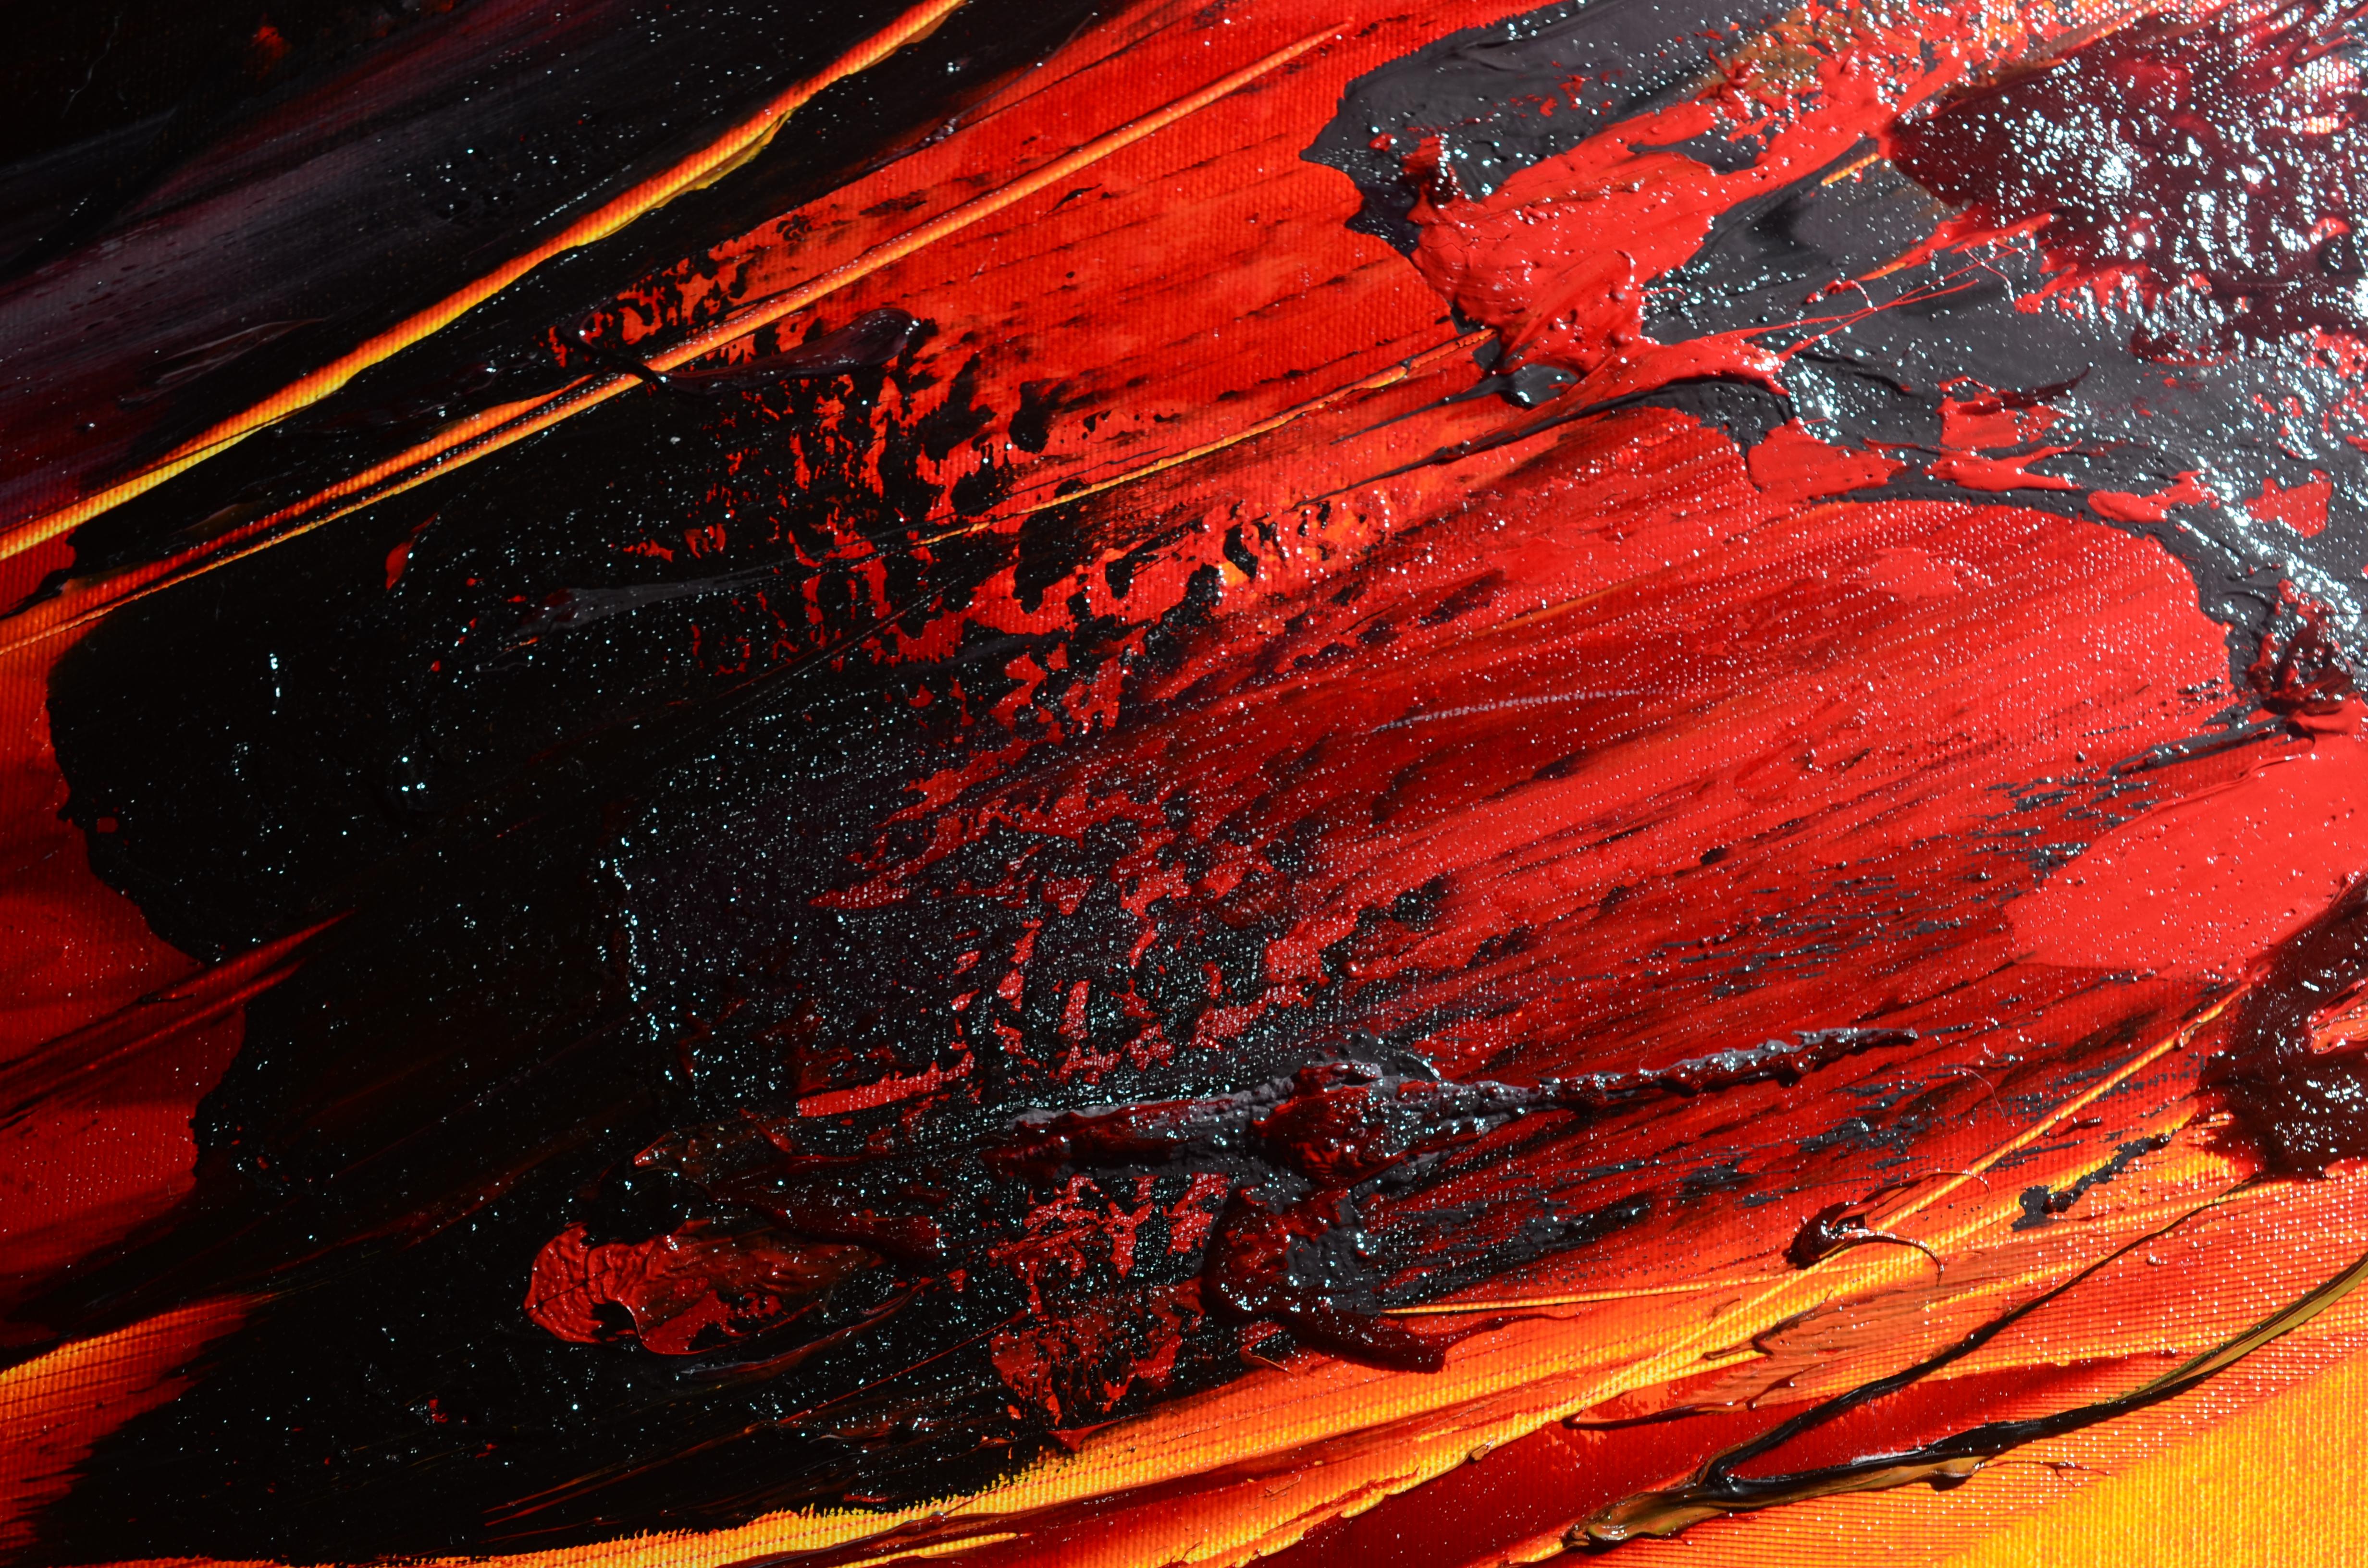 Red Orange Black Volcanic Lava Magma Explosion Abstract Oil Painting, Untitled For Sale 1